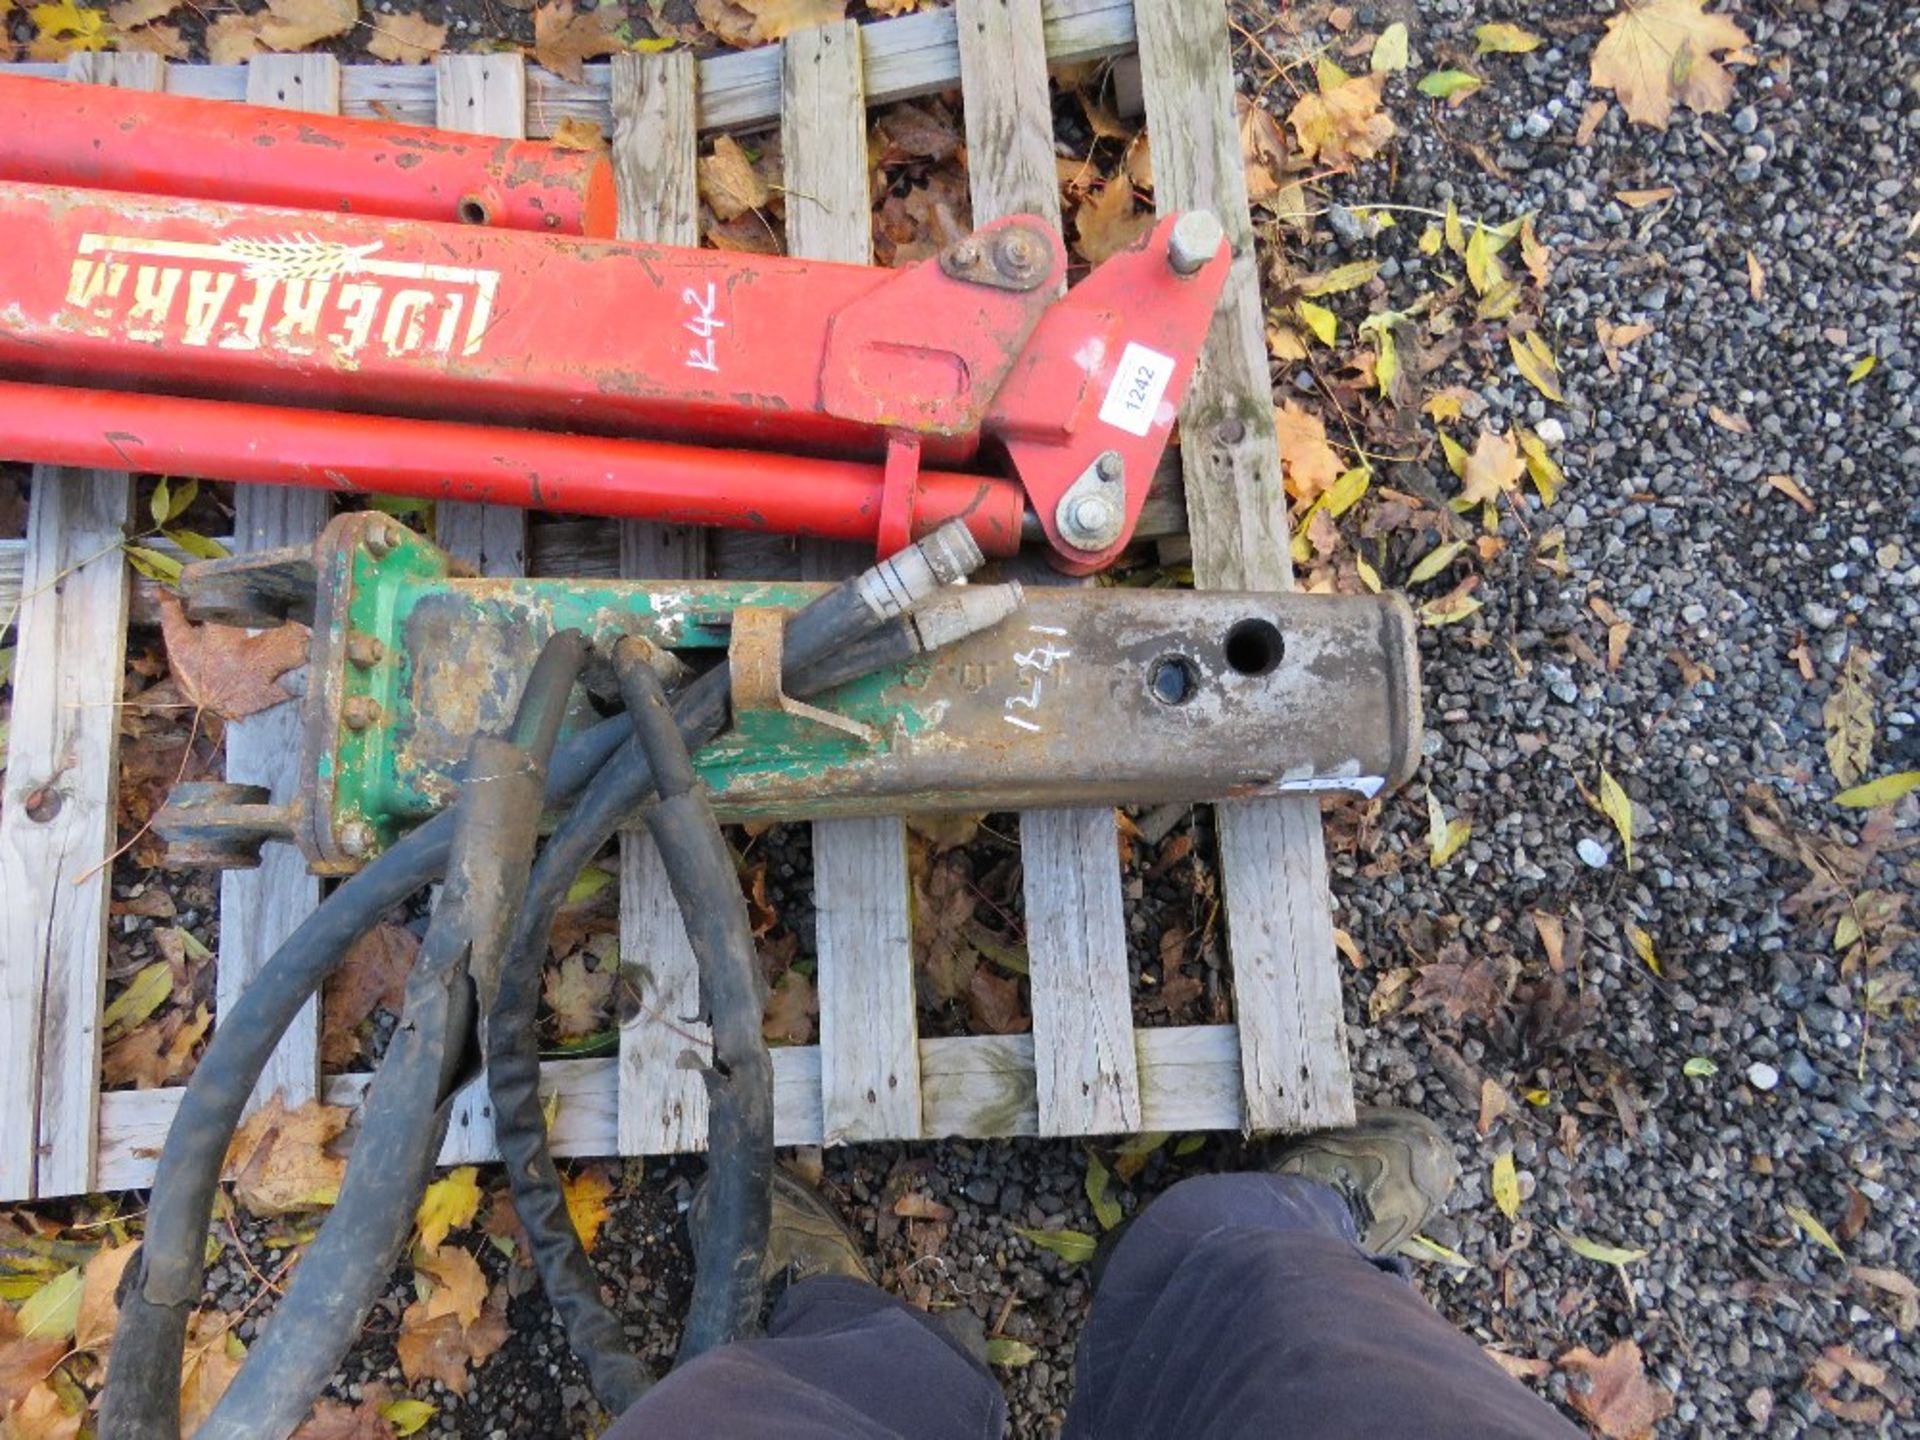 HYDRAULIC EXCAVATOR BREAKER ON 30MM PINS. NO POINT, CONDITION UNKNOWN.